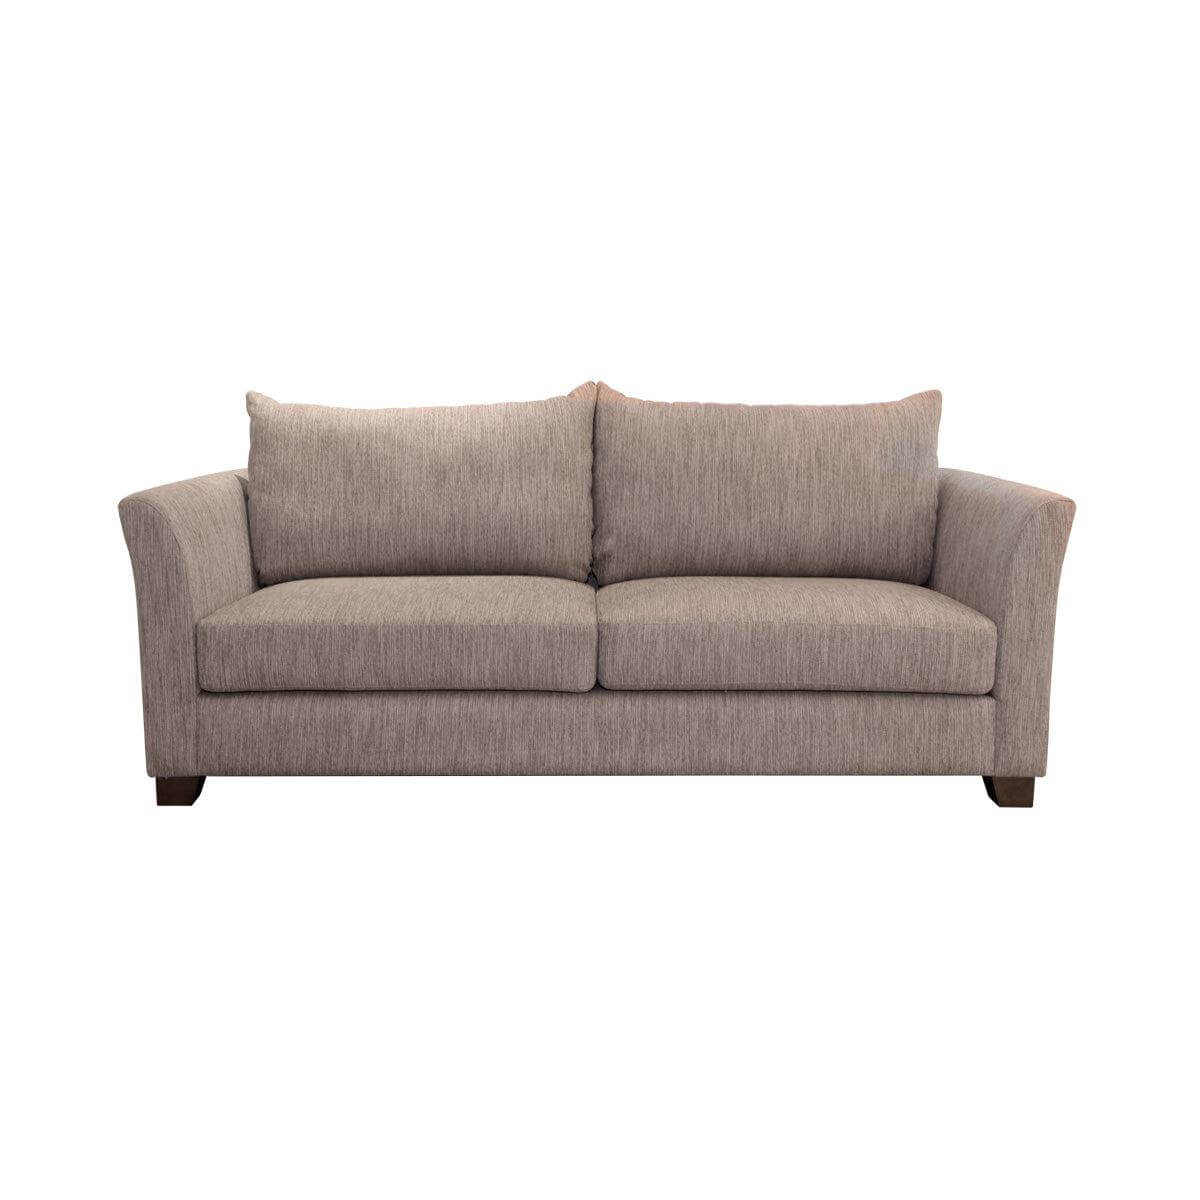 Simplicity three seat sofa, honesty and clean lines sofa